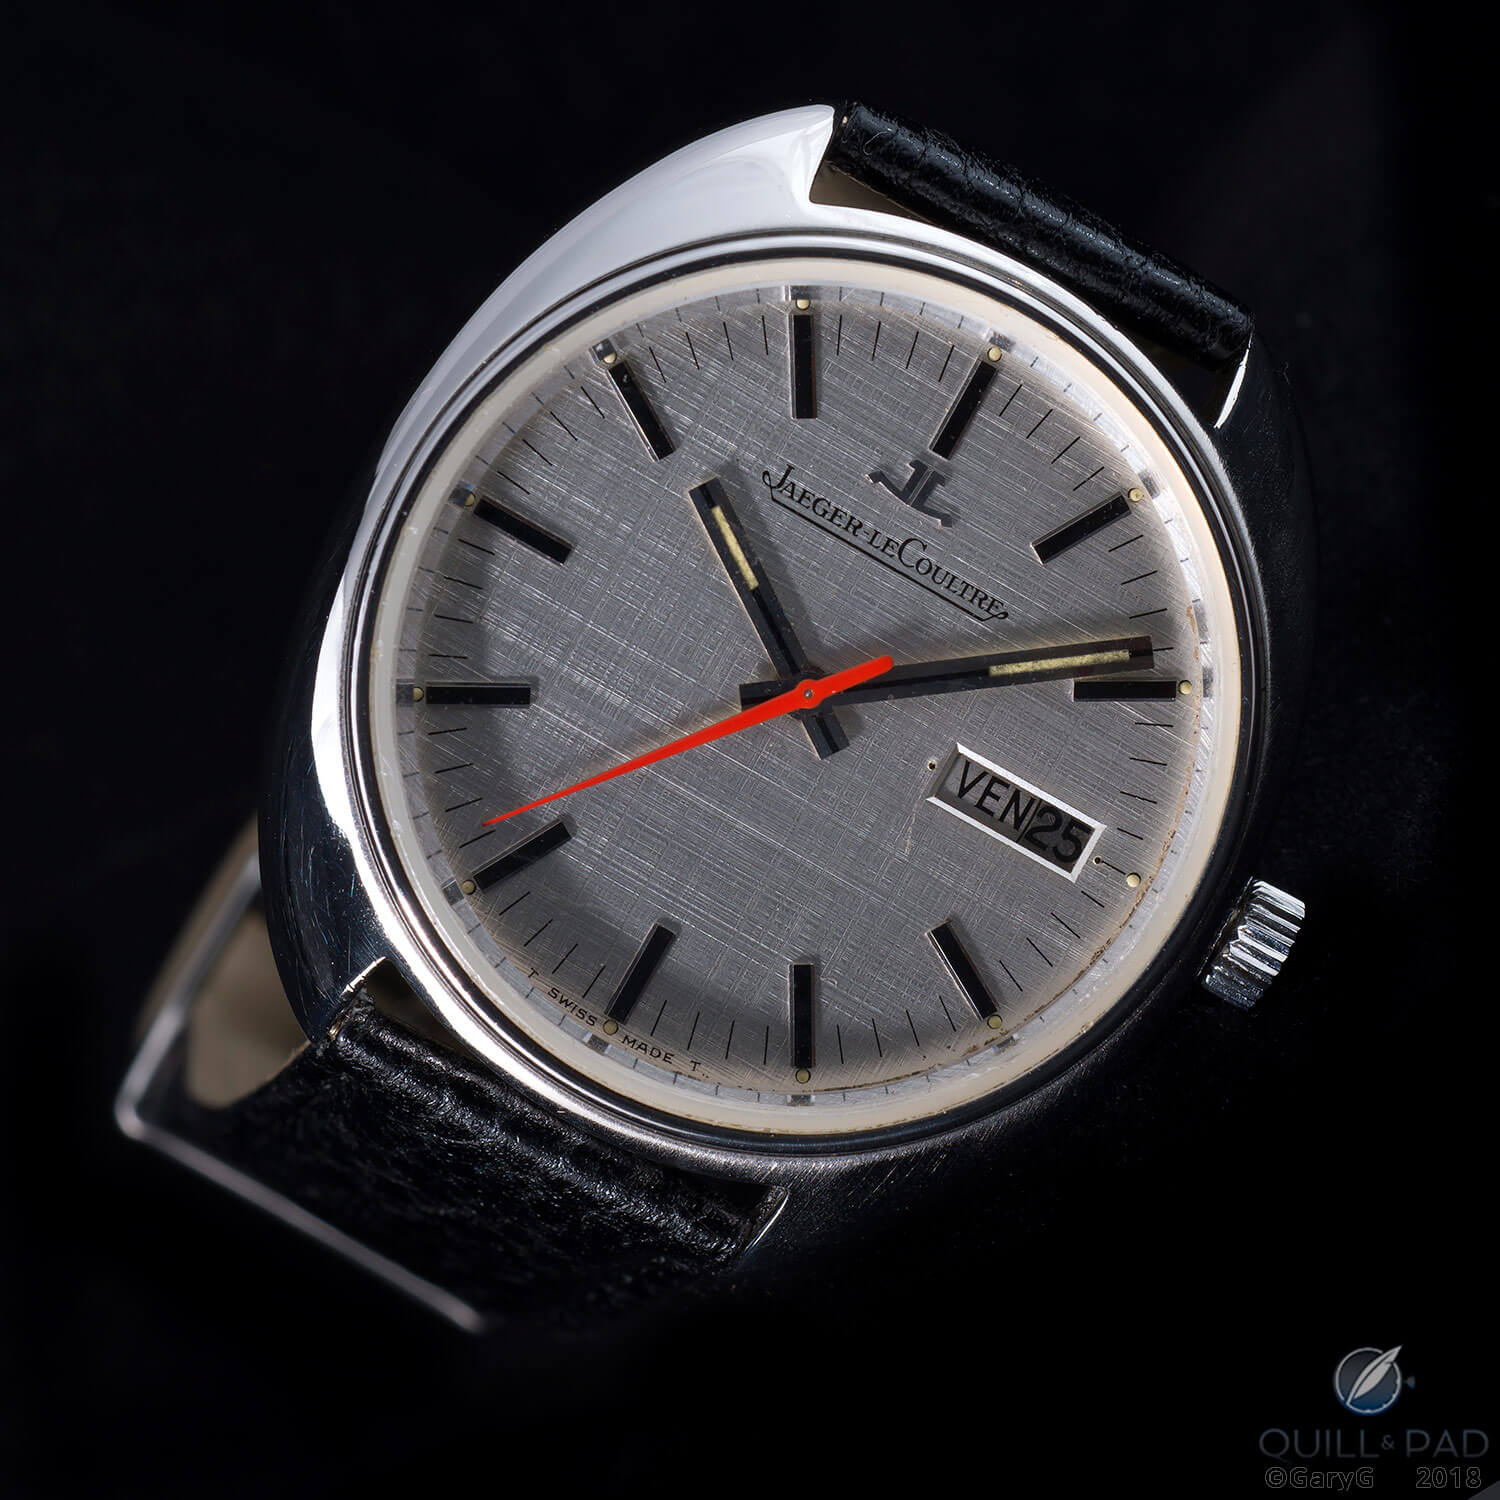 Sweeping statement: Jaeger-LeCoultre prototype watch with bright sweep seconds hand